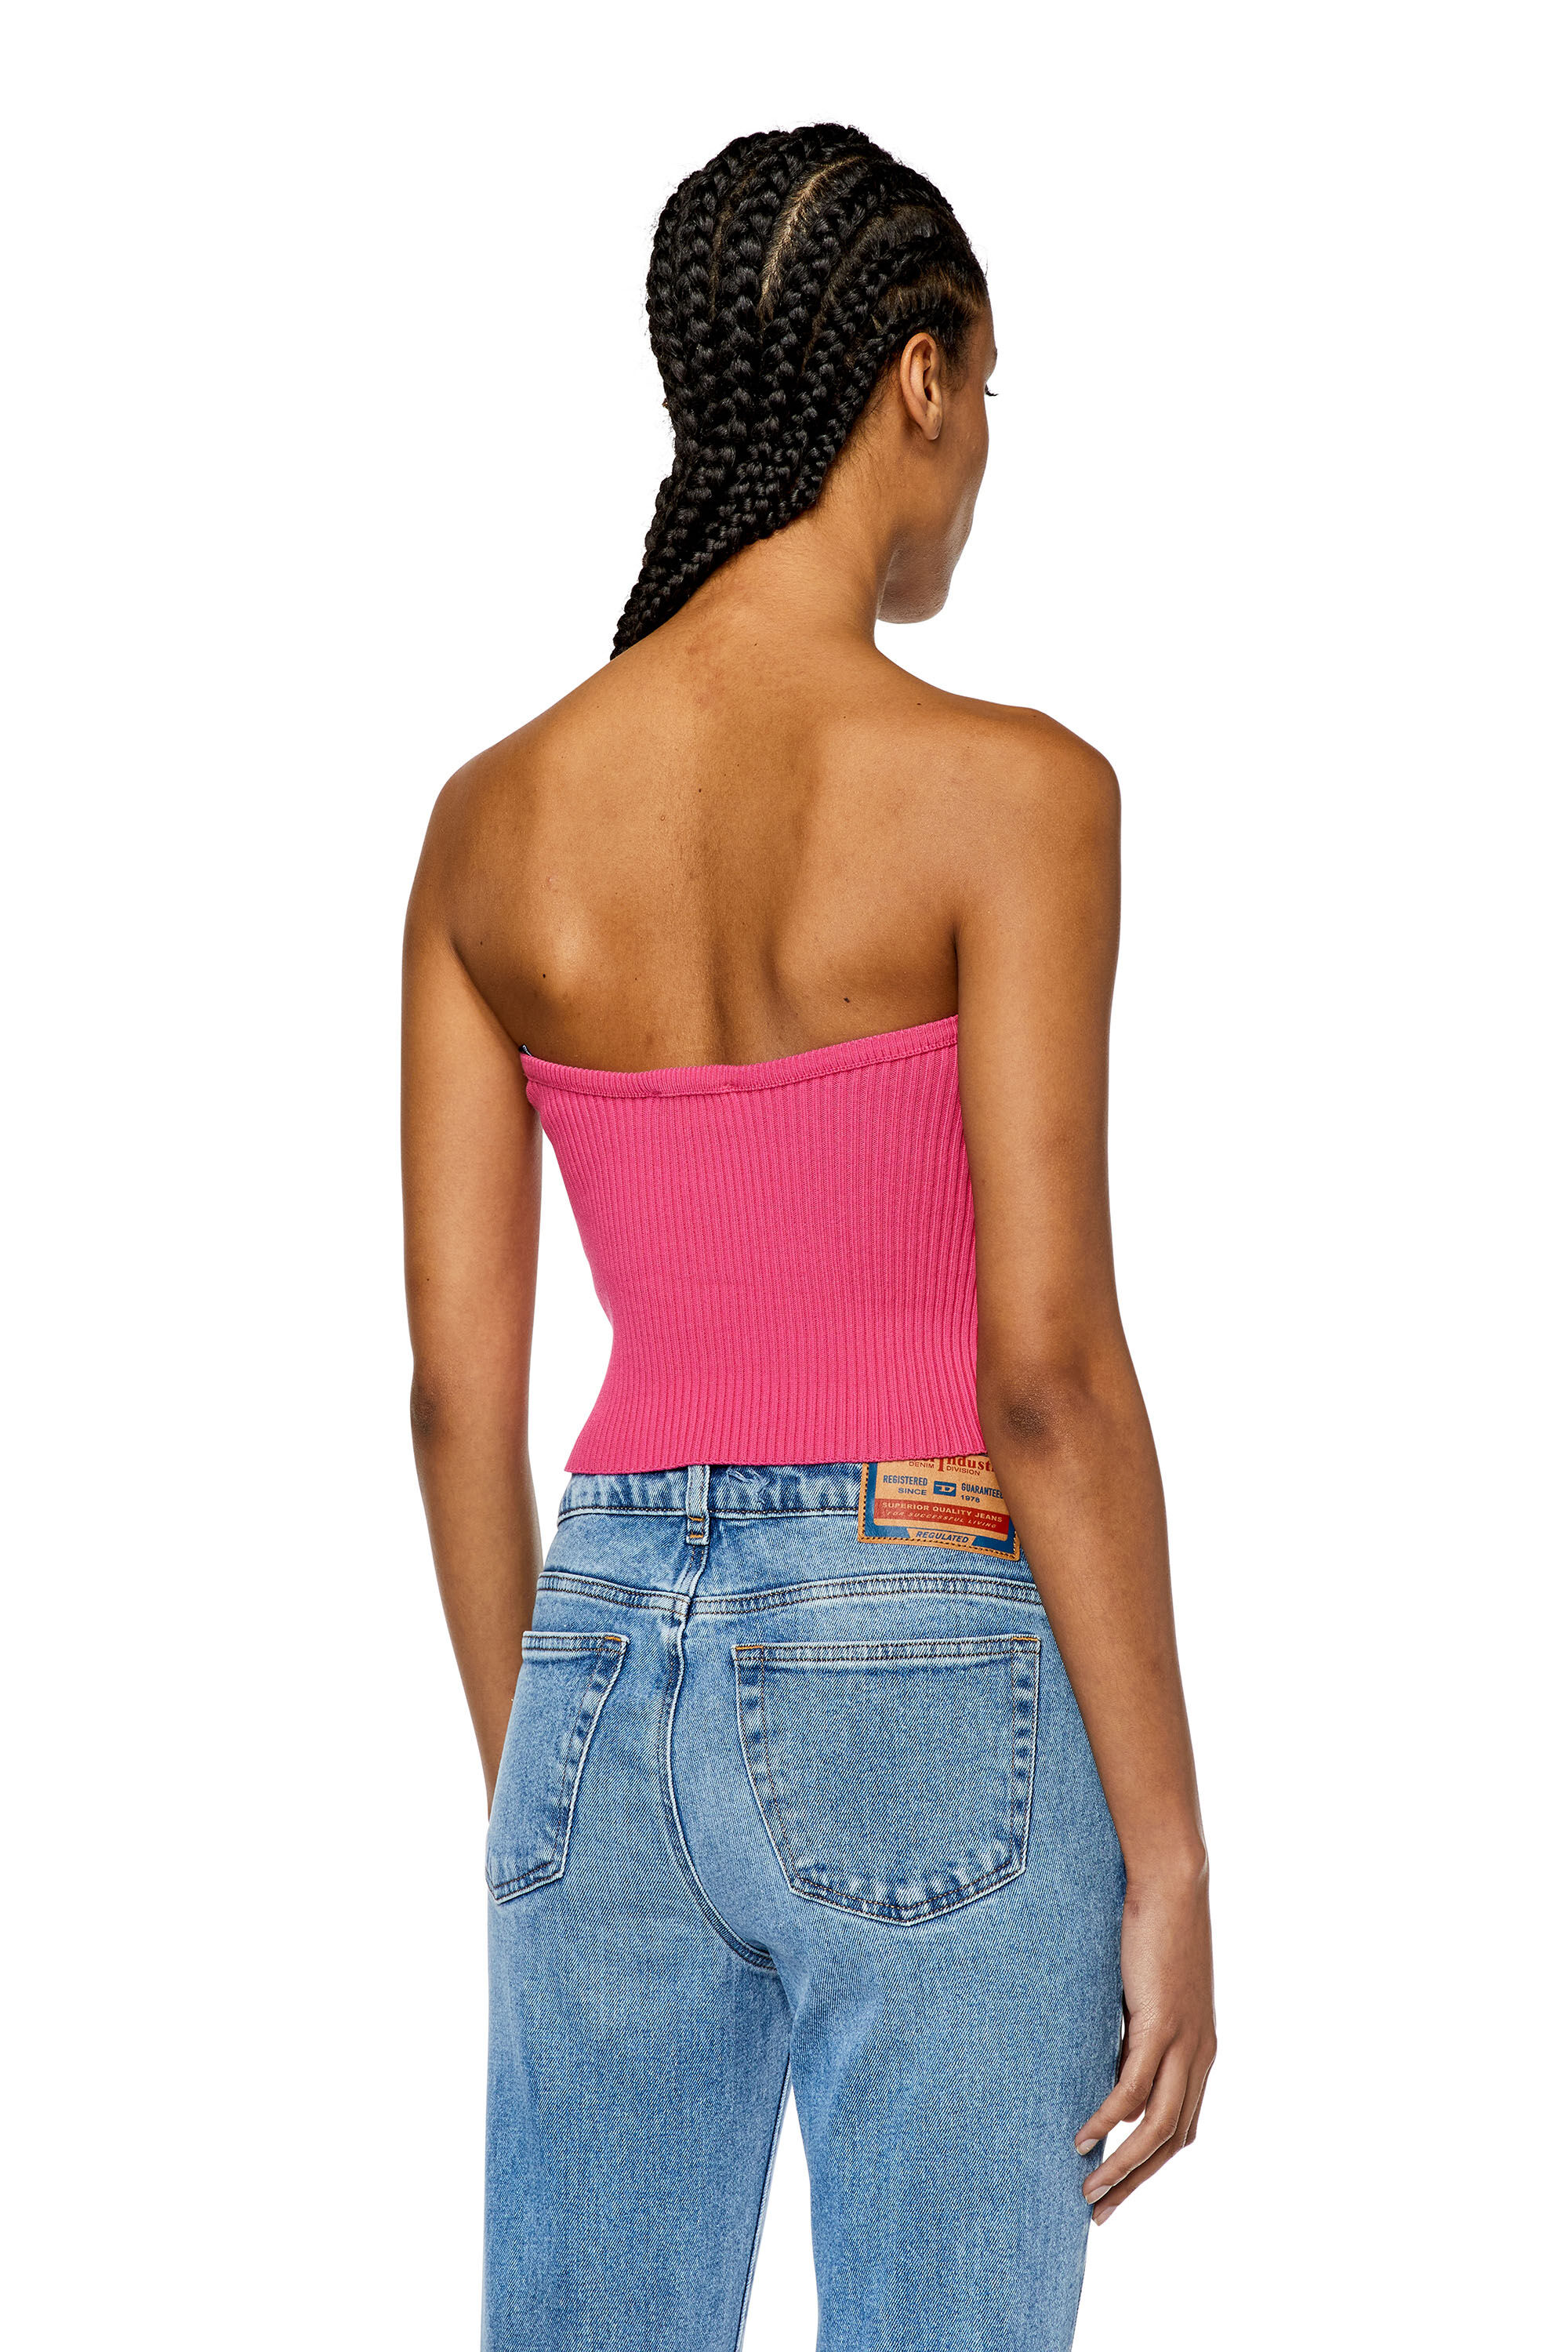 Diesel - M-CLARKSVILLE-B, Woman Bandeau top with oval D plaque in Pink - Image 4